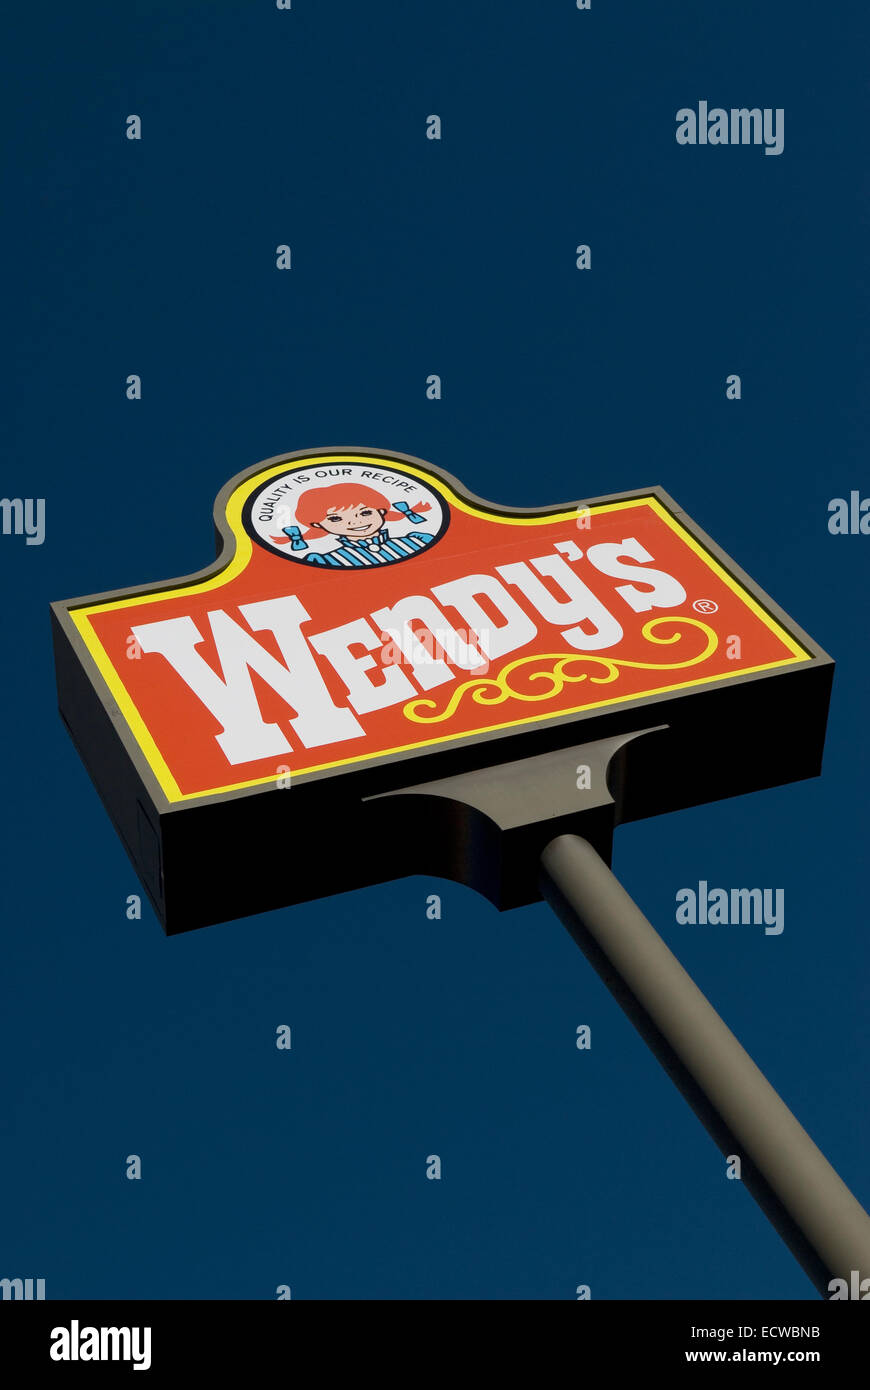 Stock photo of Wendy's sign, USA. Stock Photo